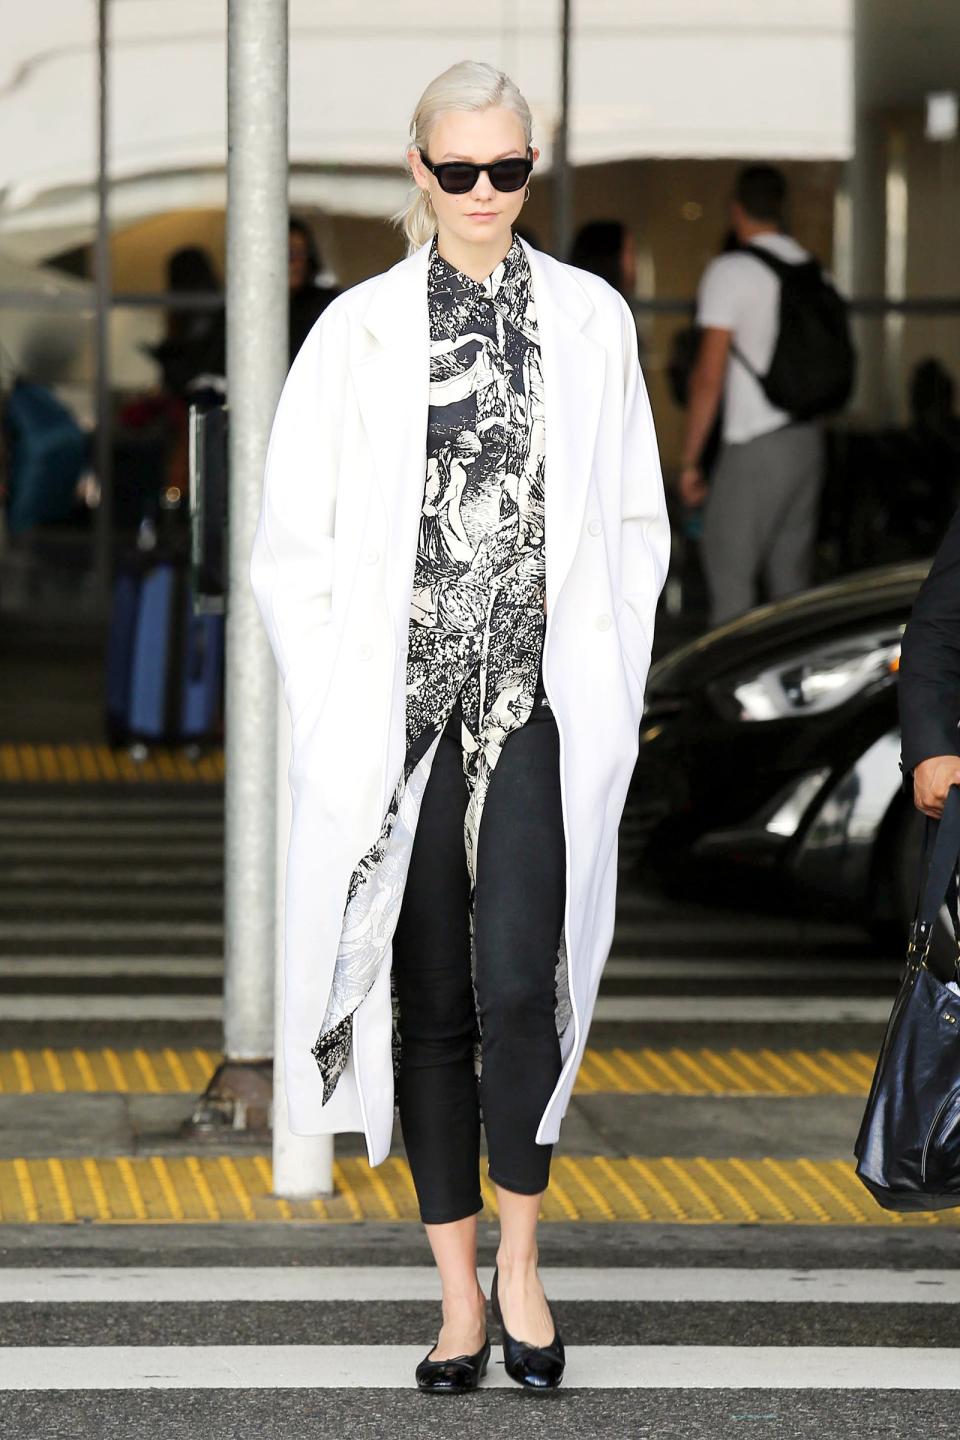 Make a Karlie Kloss–style arrival in a printed top and black pants.